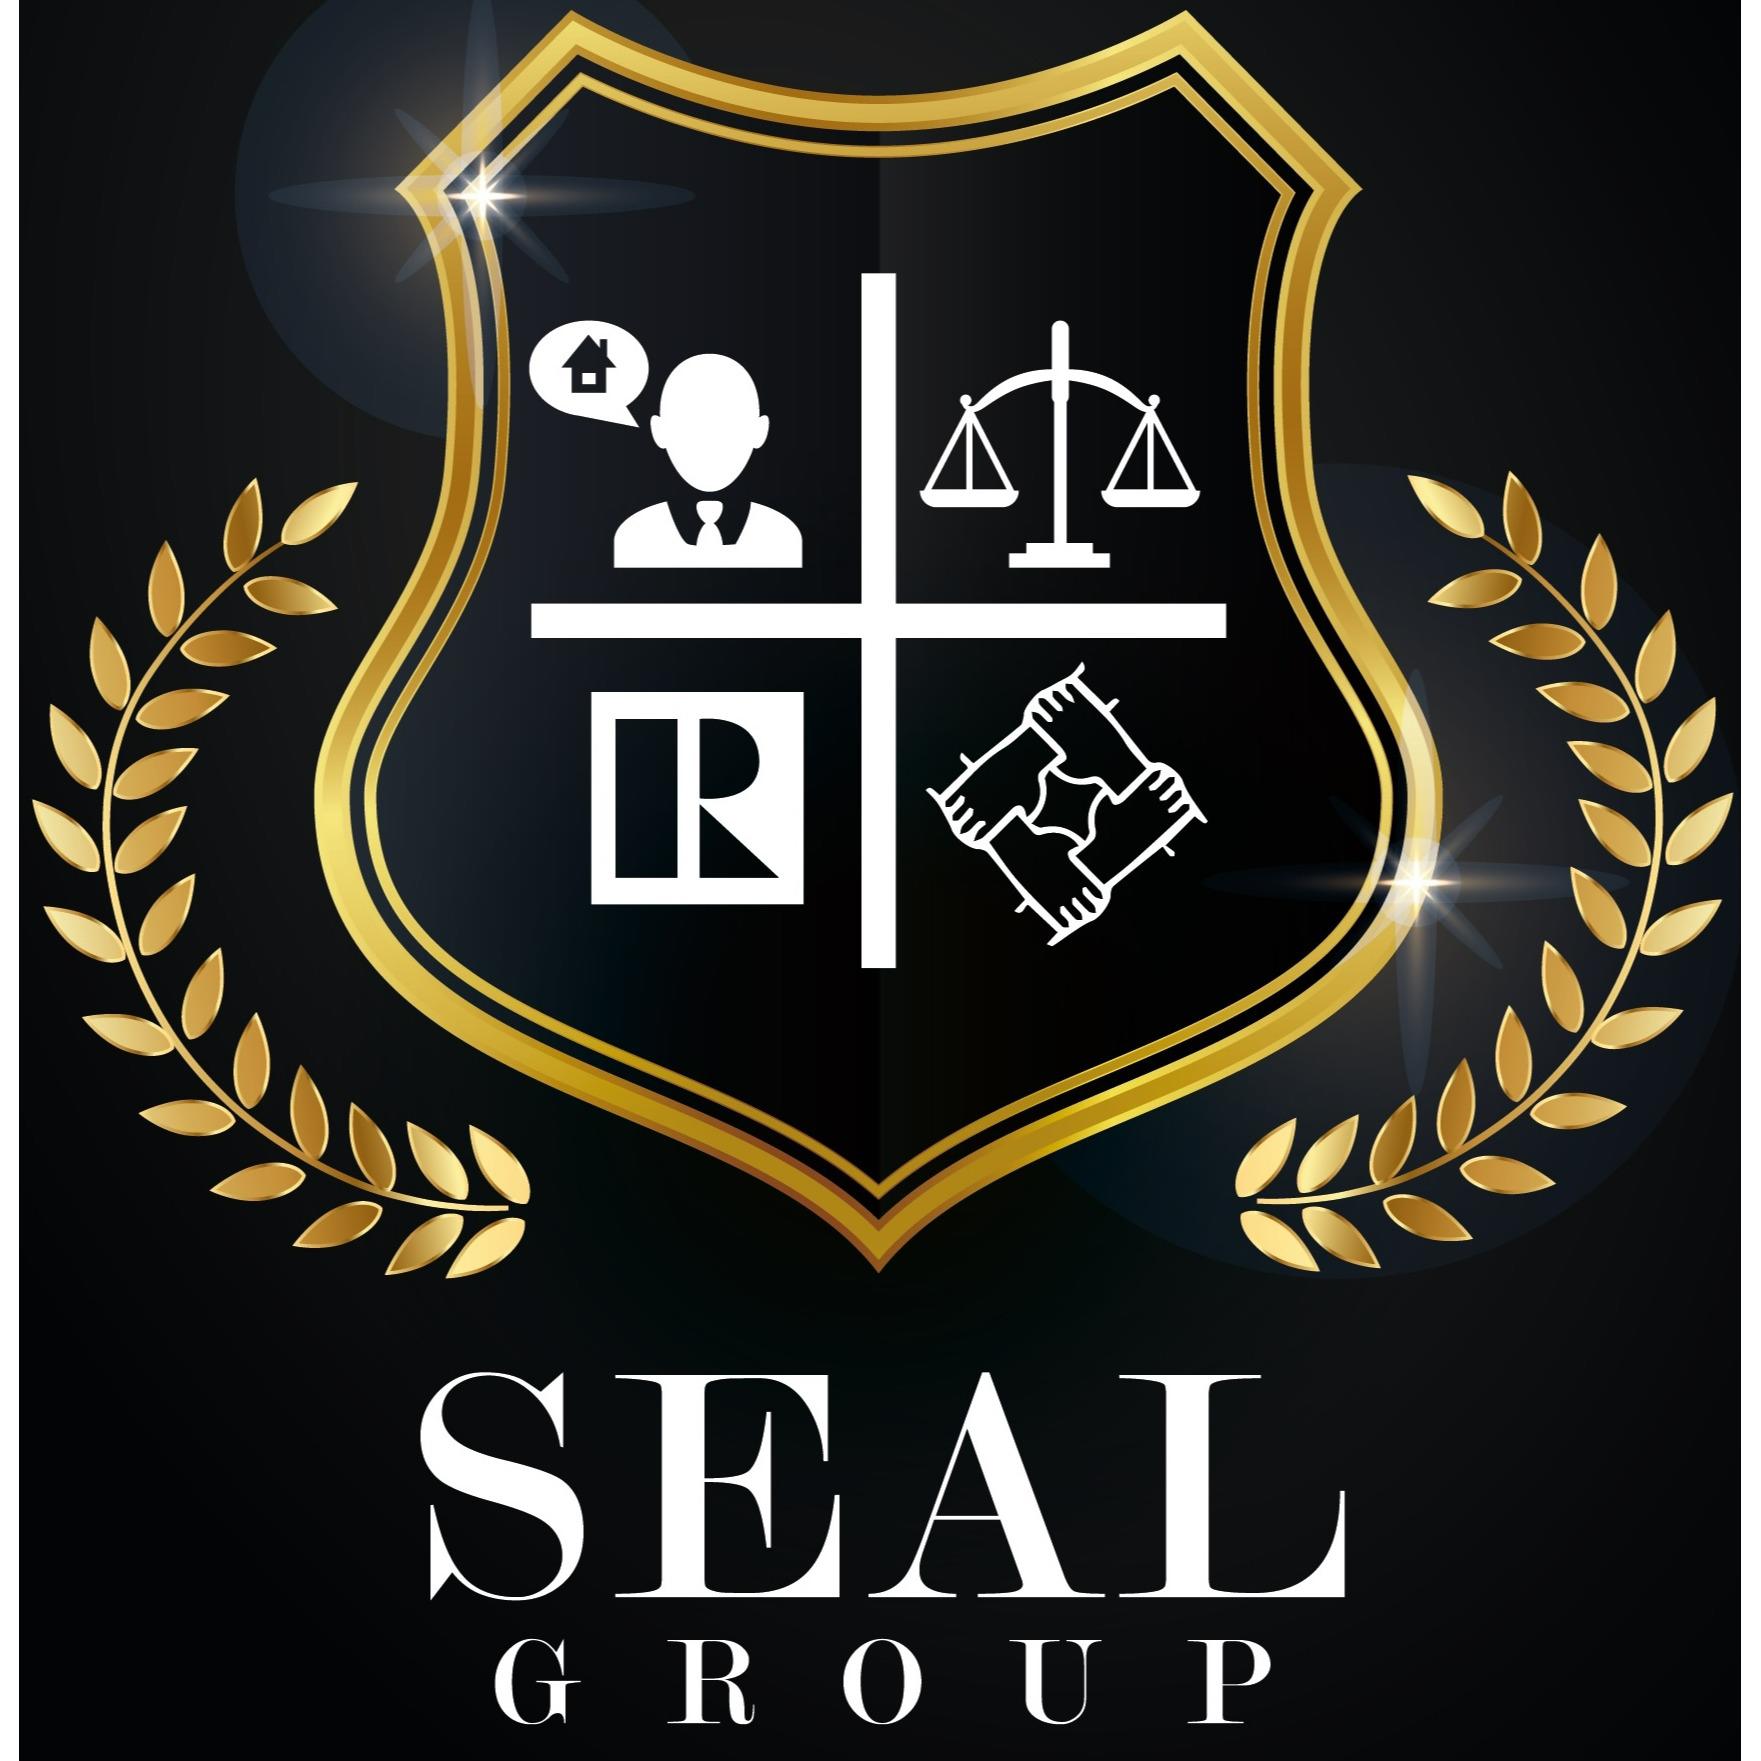 The SEAL Group